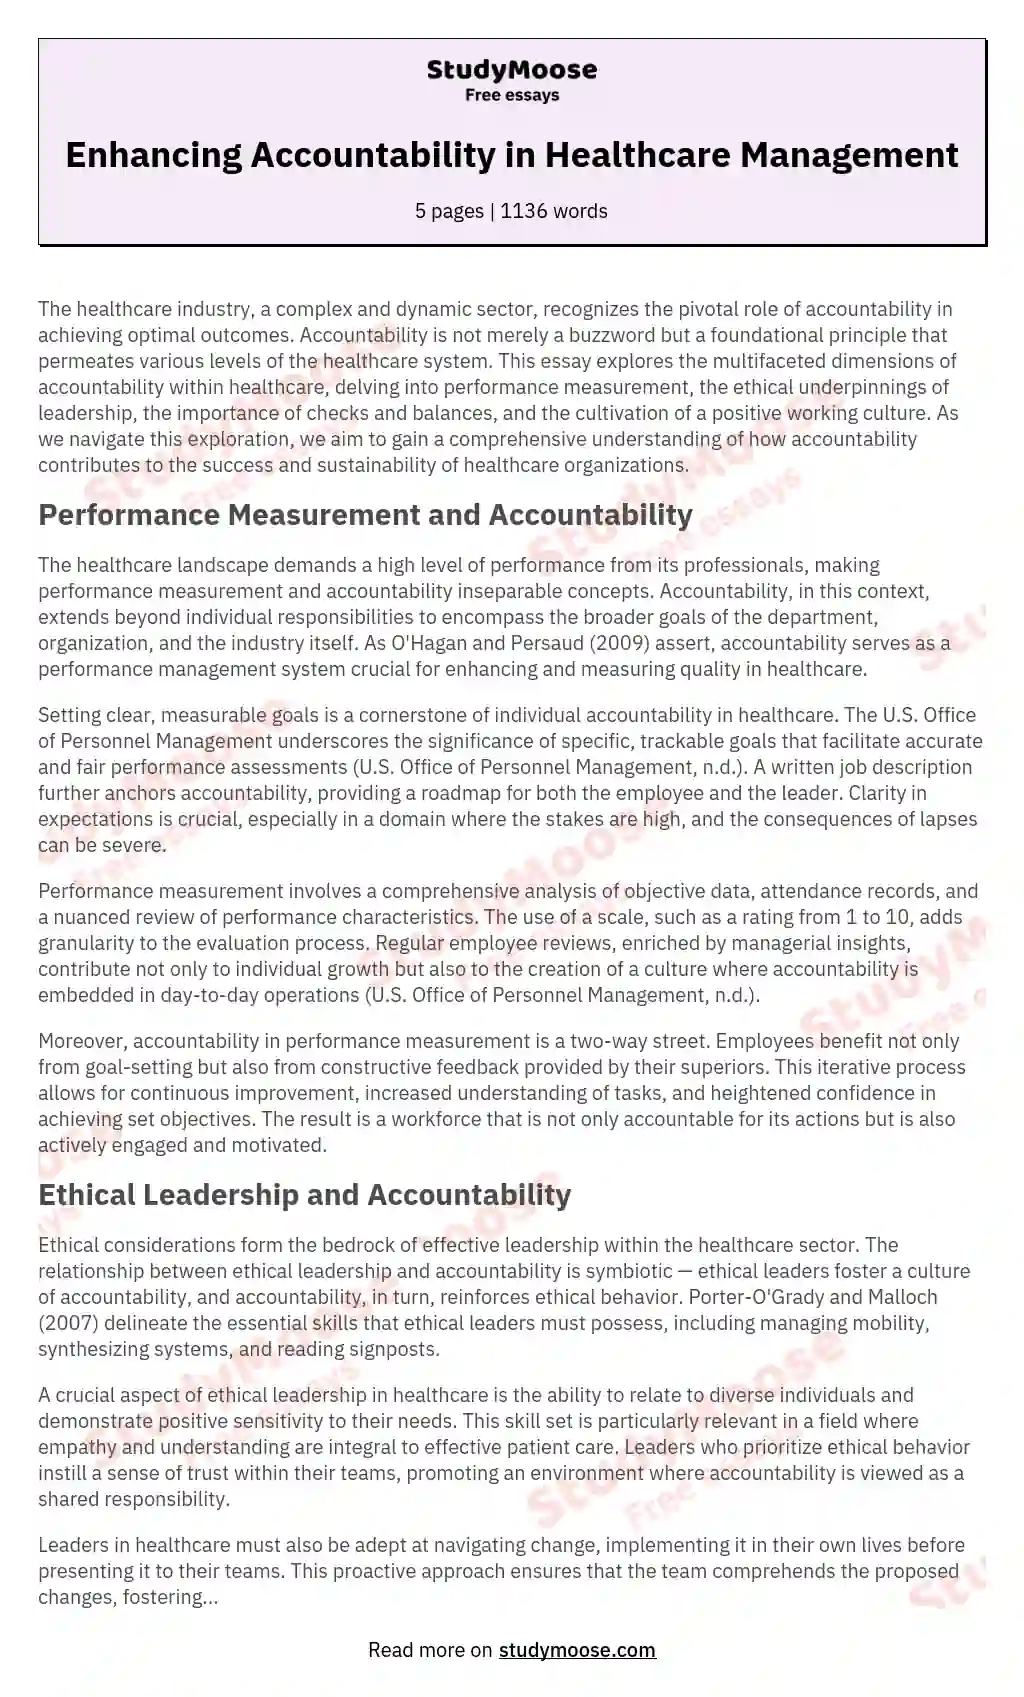 The Importance of Accountability Paper